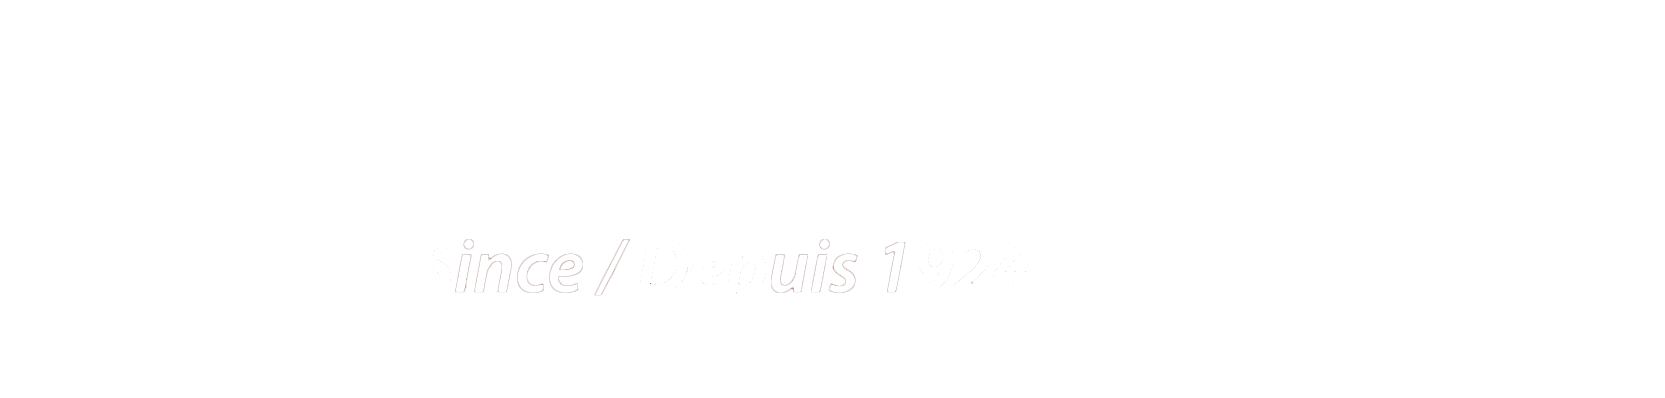 Cansew